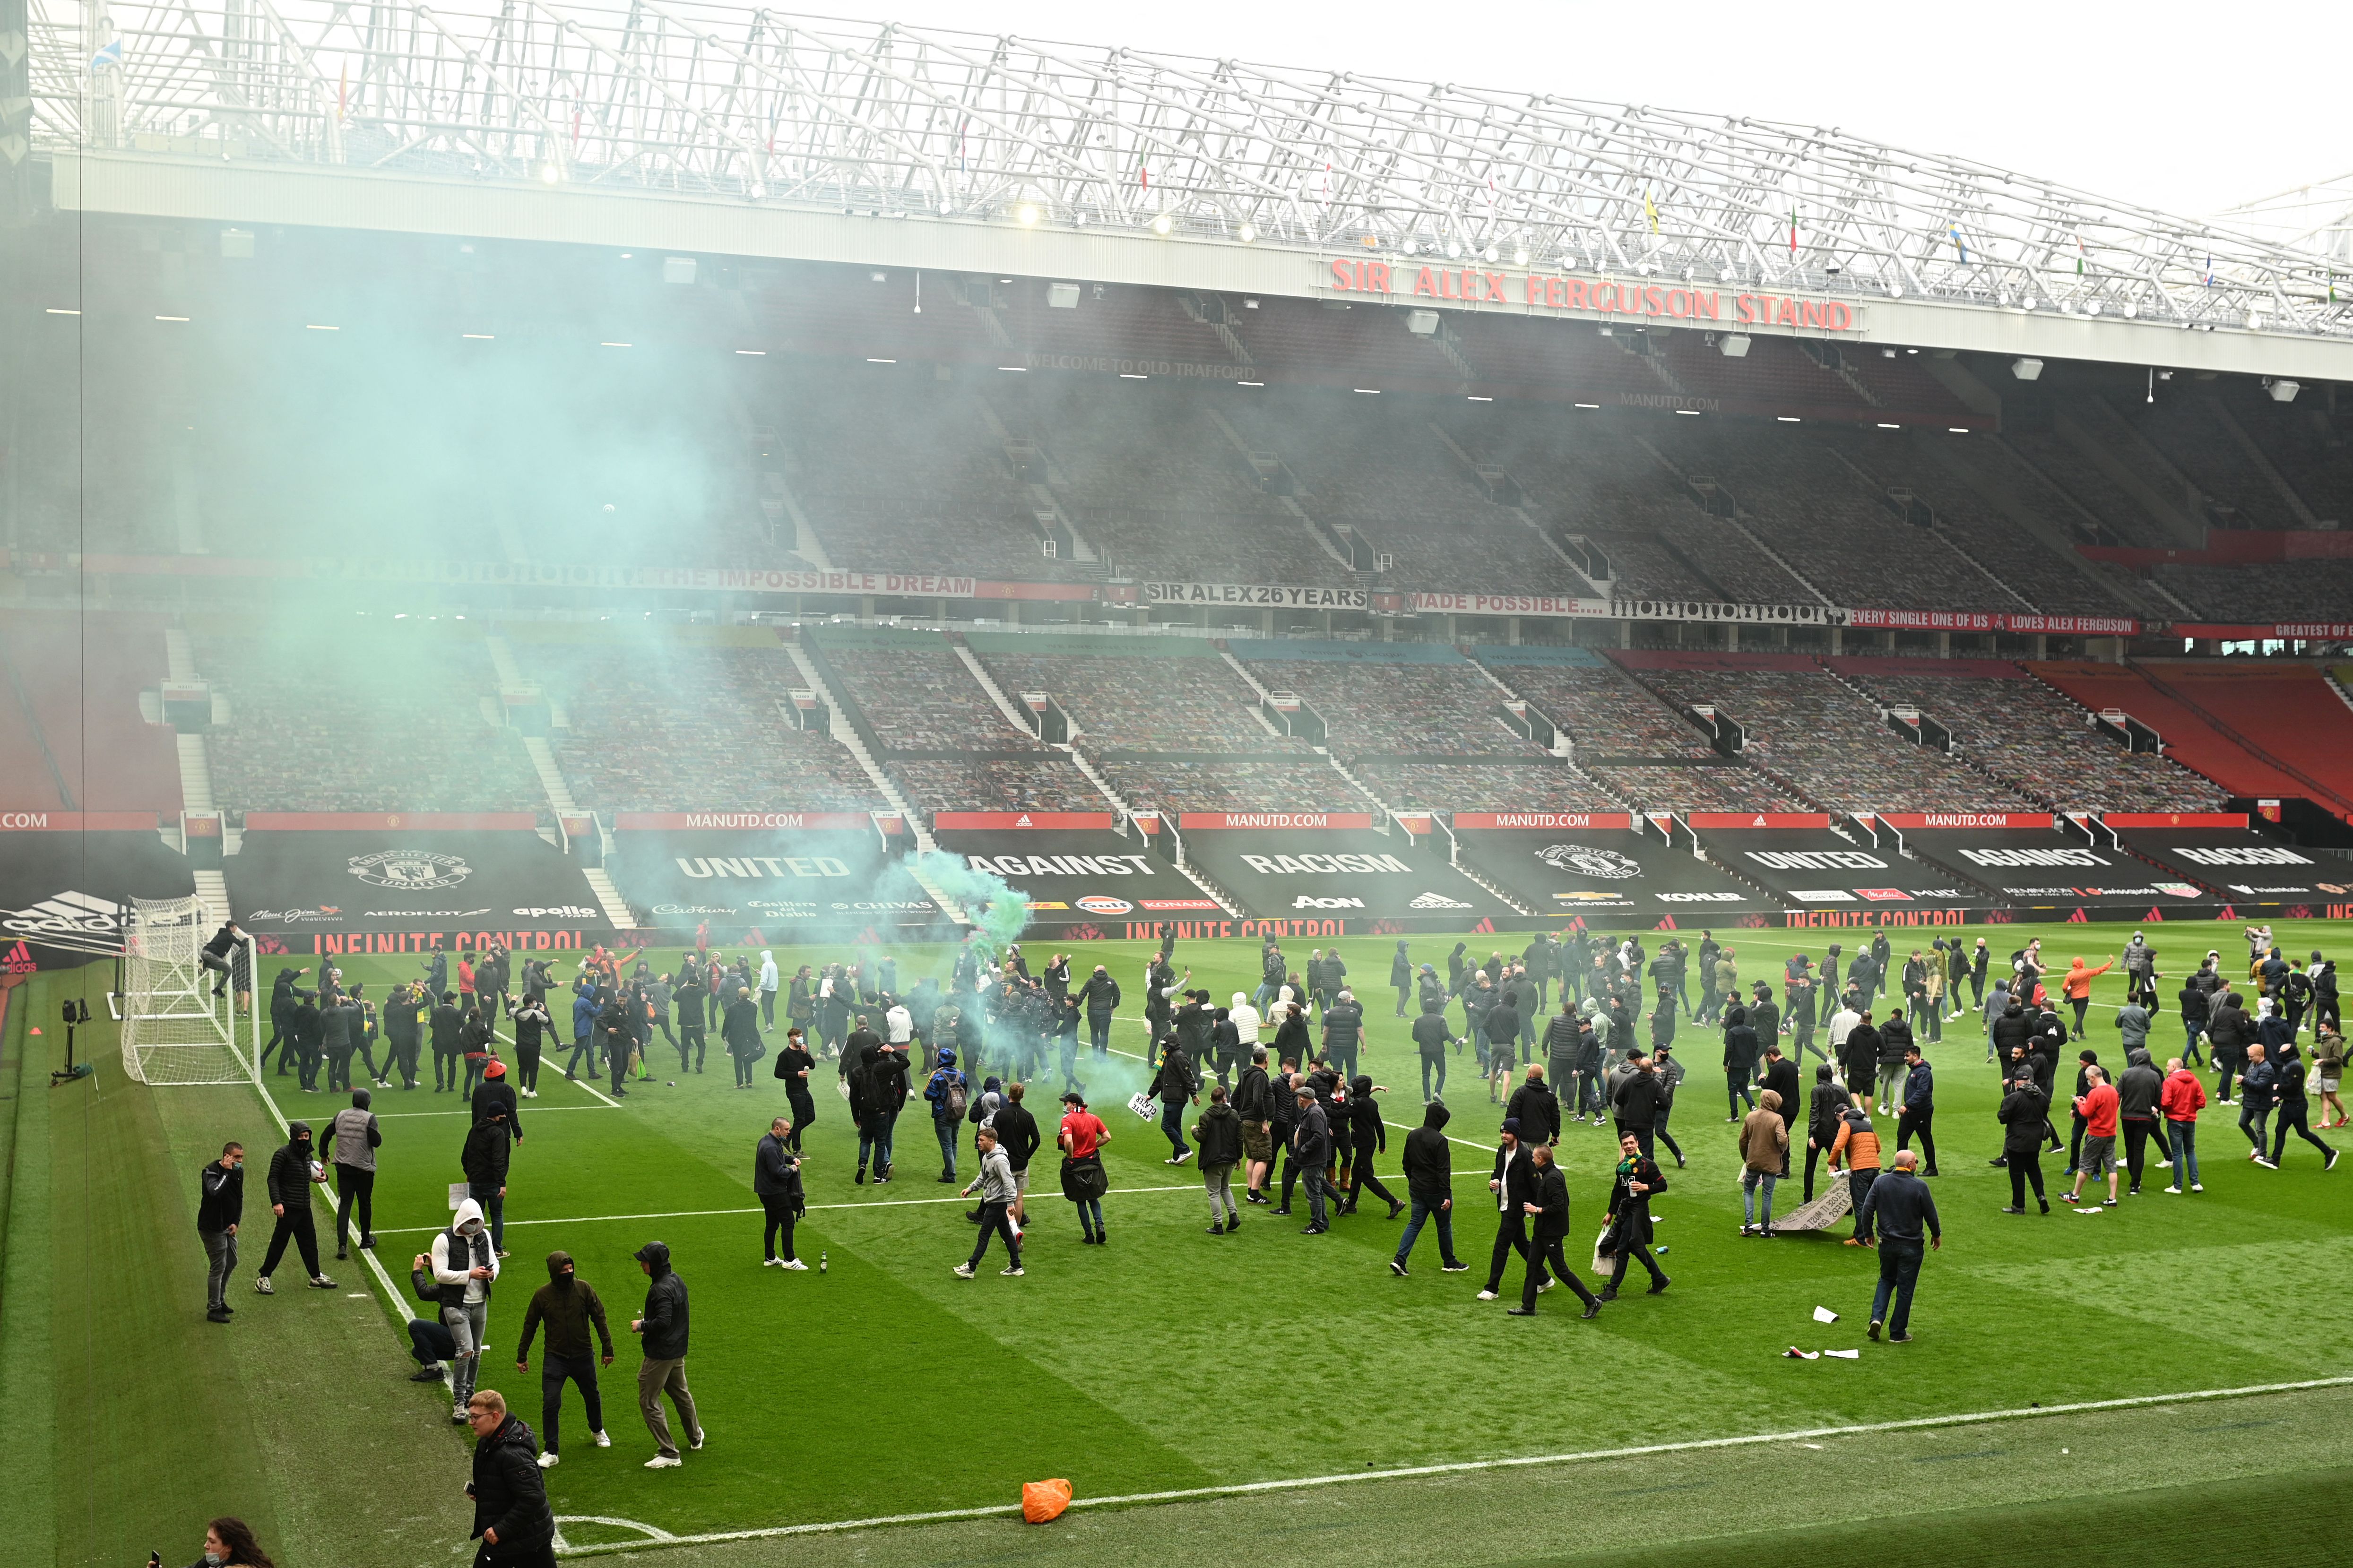 Fans broke into Old Trafford, postponing this fixture five months ago